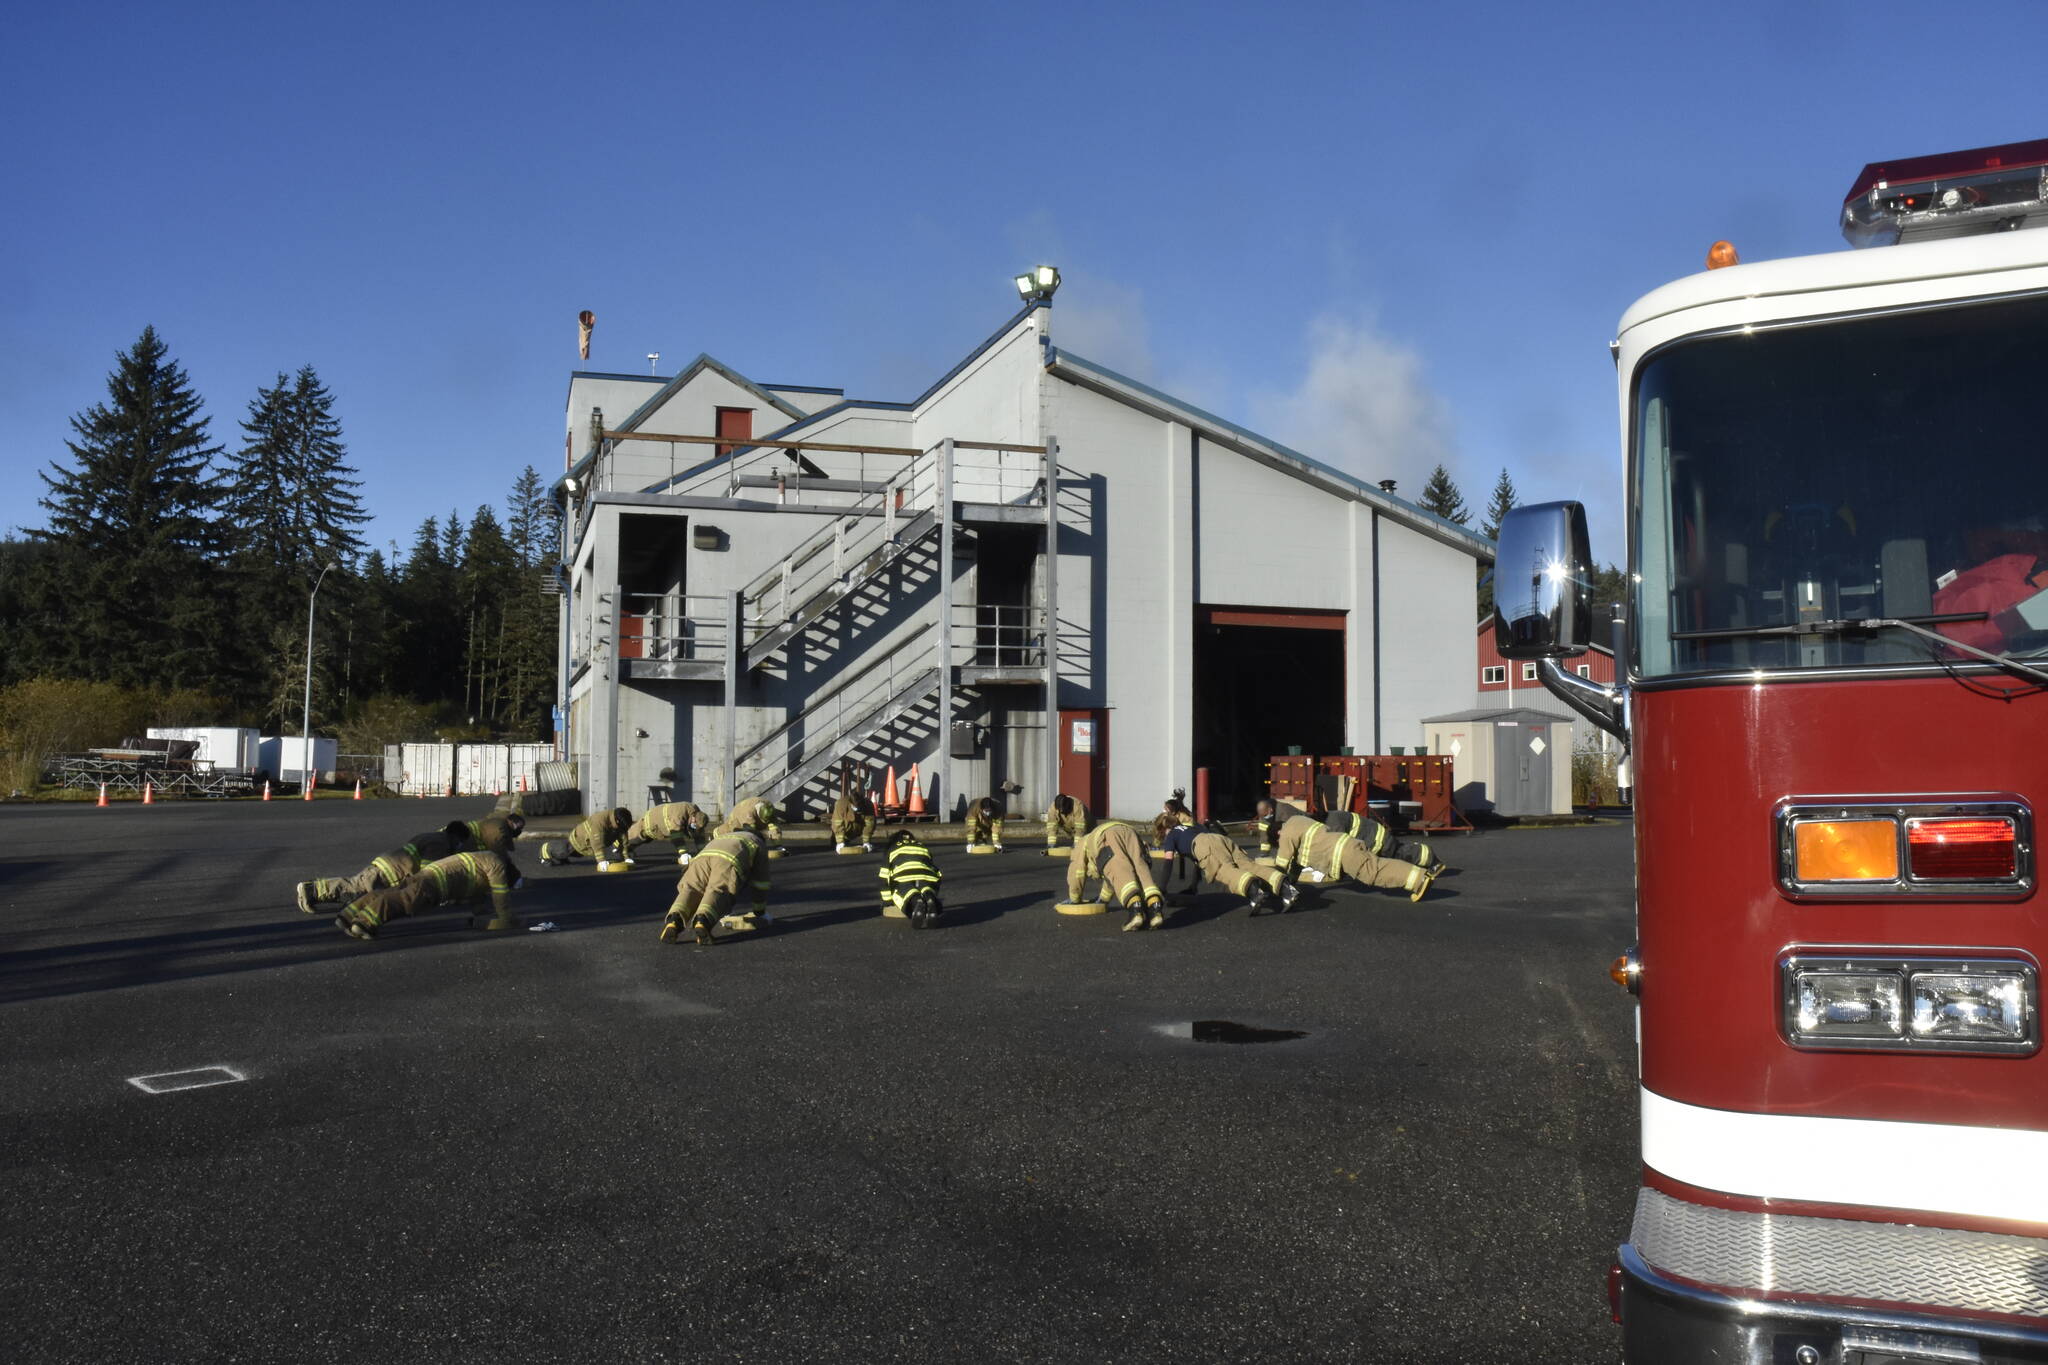 Cadets exercise as part of Capital City Fire/Rescue’s Cadet Program at Hagevig Regional Fire Training Center on Oct. 16, 2021. (Peter Segall / Juneau Empire)